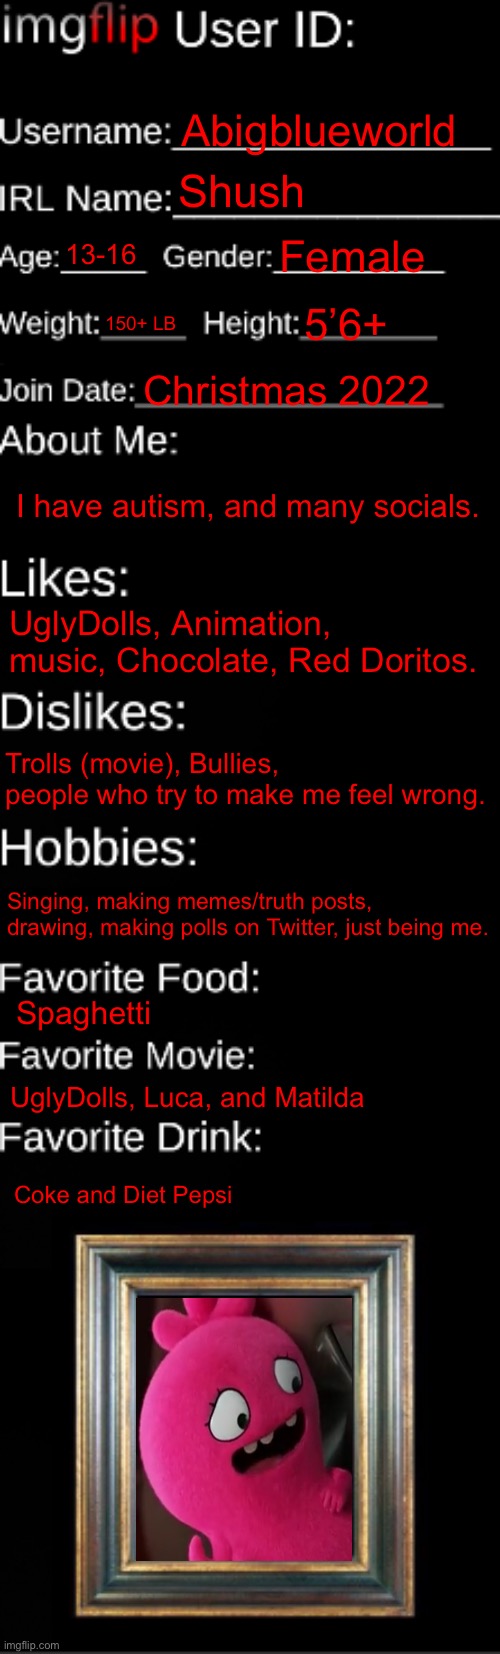 About me | Abigblueworld; Shush; 13-16; Female; 150+ LB; 5’6+; Christmas 2022; I have autism, and many socials. UglyDolls, Animation, music, Chocolate, Red Doritos. Trolls (movie), Bullies, people who try to make me feel wrong. Singing, making memes/truth posts, drawing, making polls on Twitter, just being me. Spaghetti; UglyDolls, Luca, and Matilda; Coke and Diet Pepsi | image tagged in imgflip id card | made w/ Imgflip meme maker